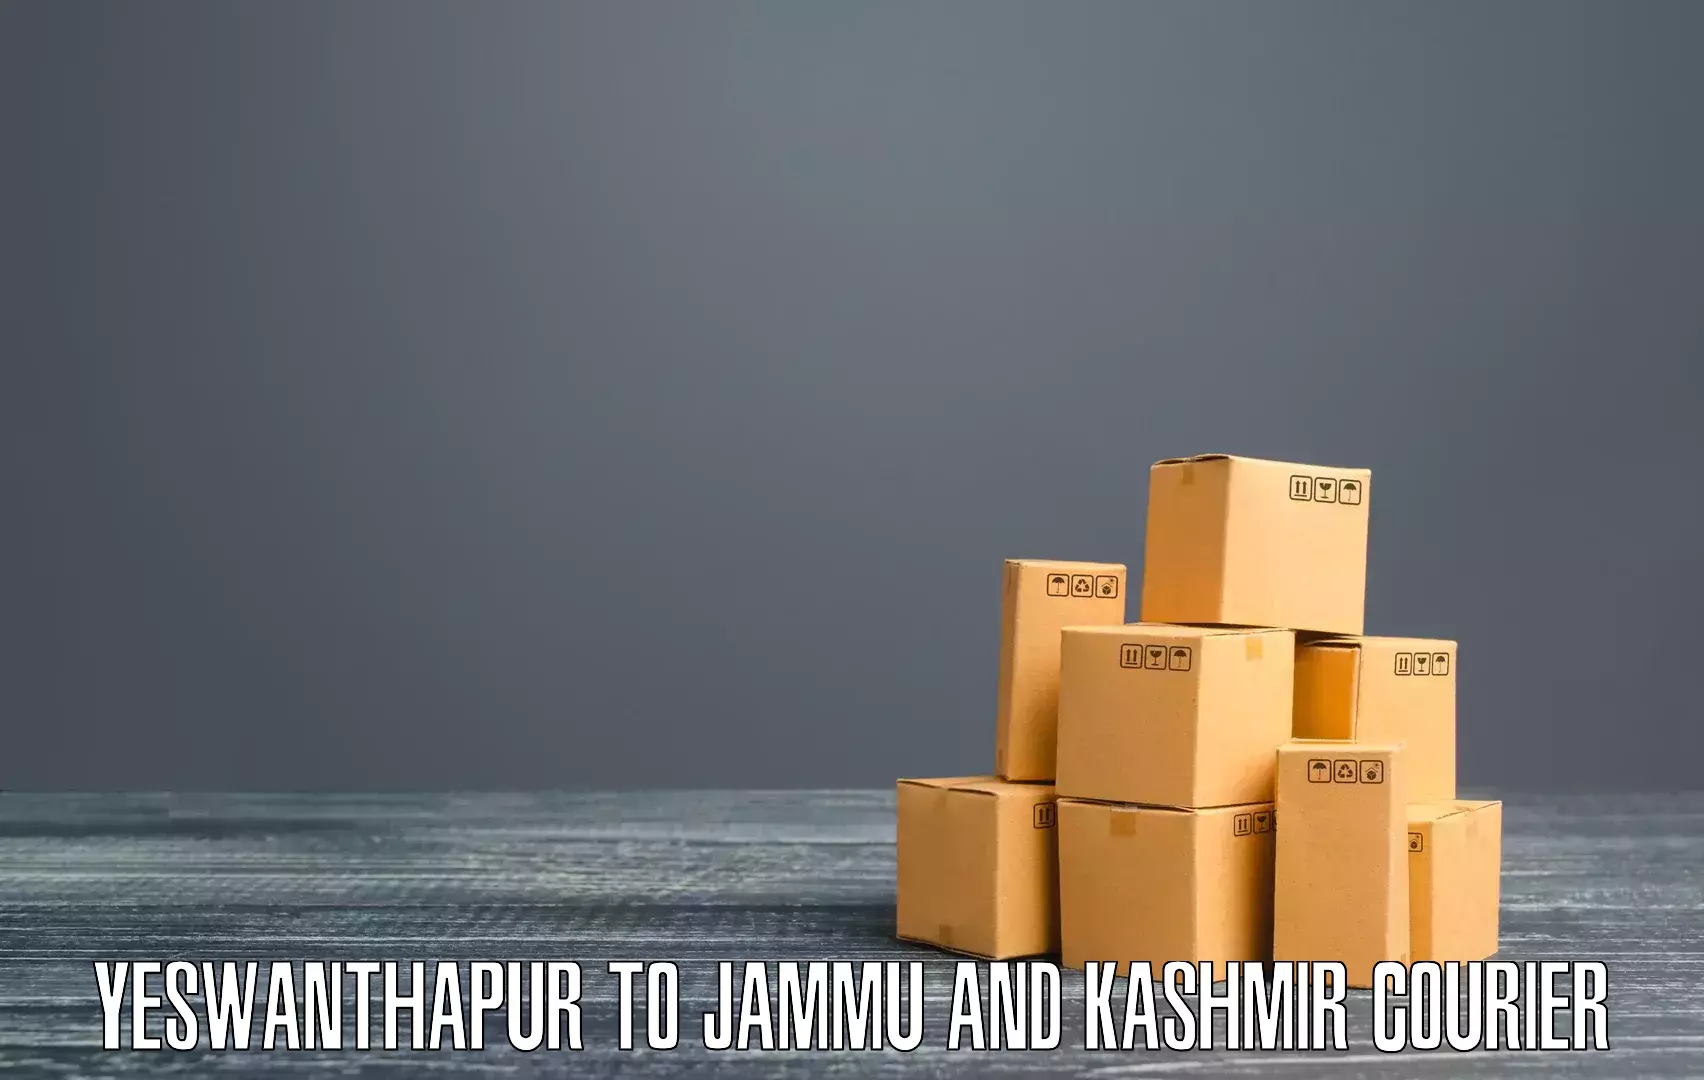 Courier service partnerships Yeswanthapur to Kargil